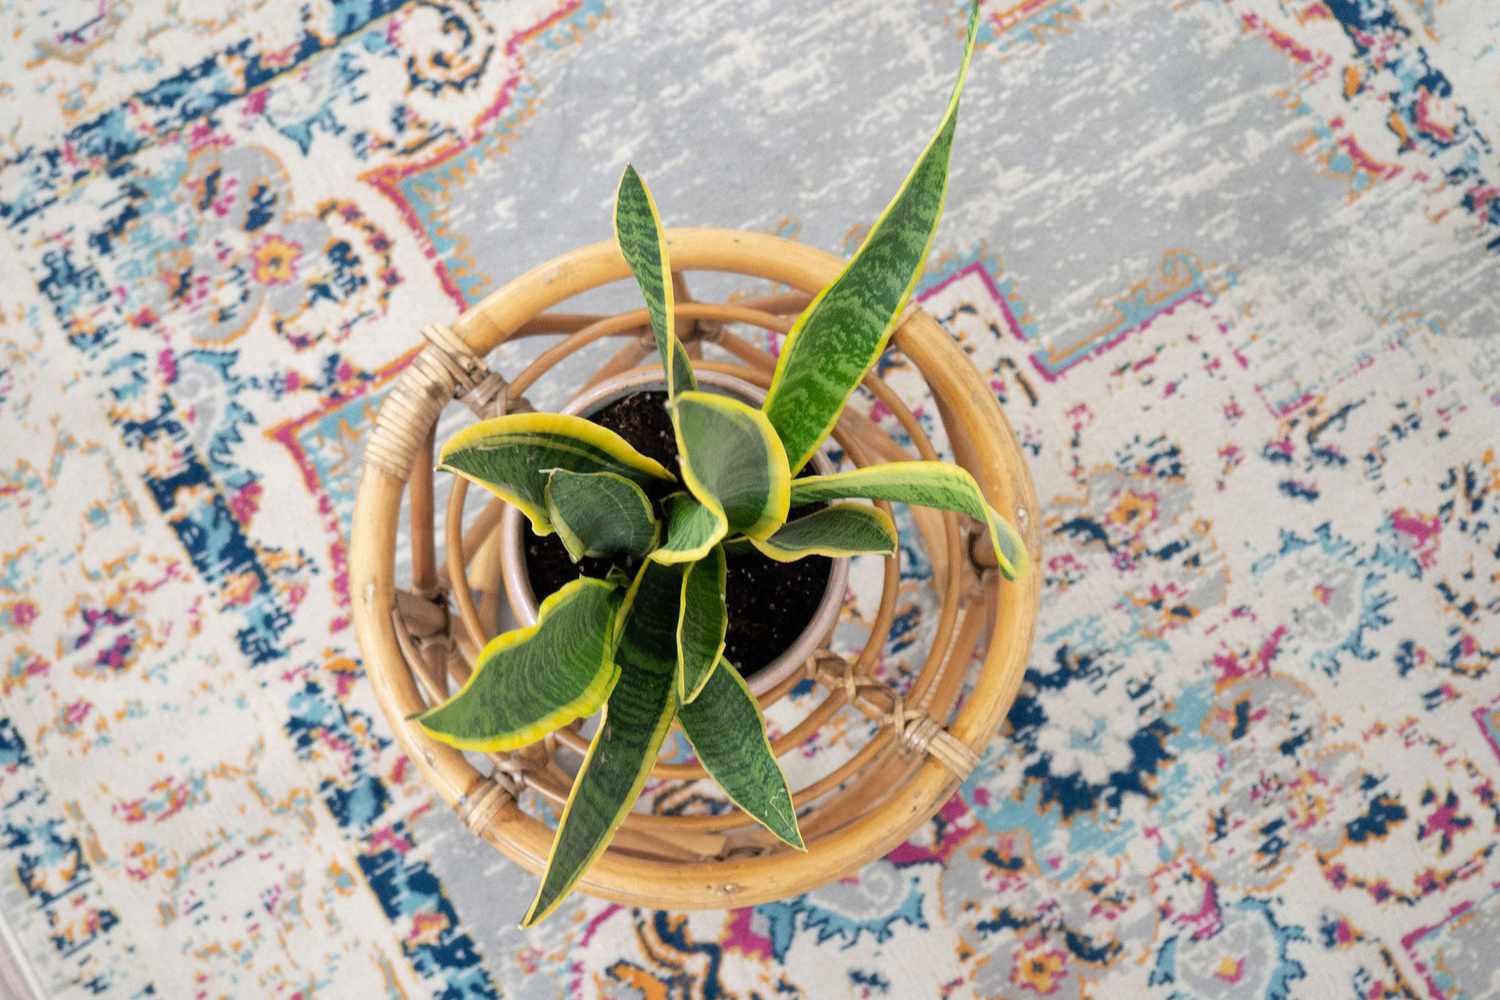 How To Propagate A Snake Plant